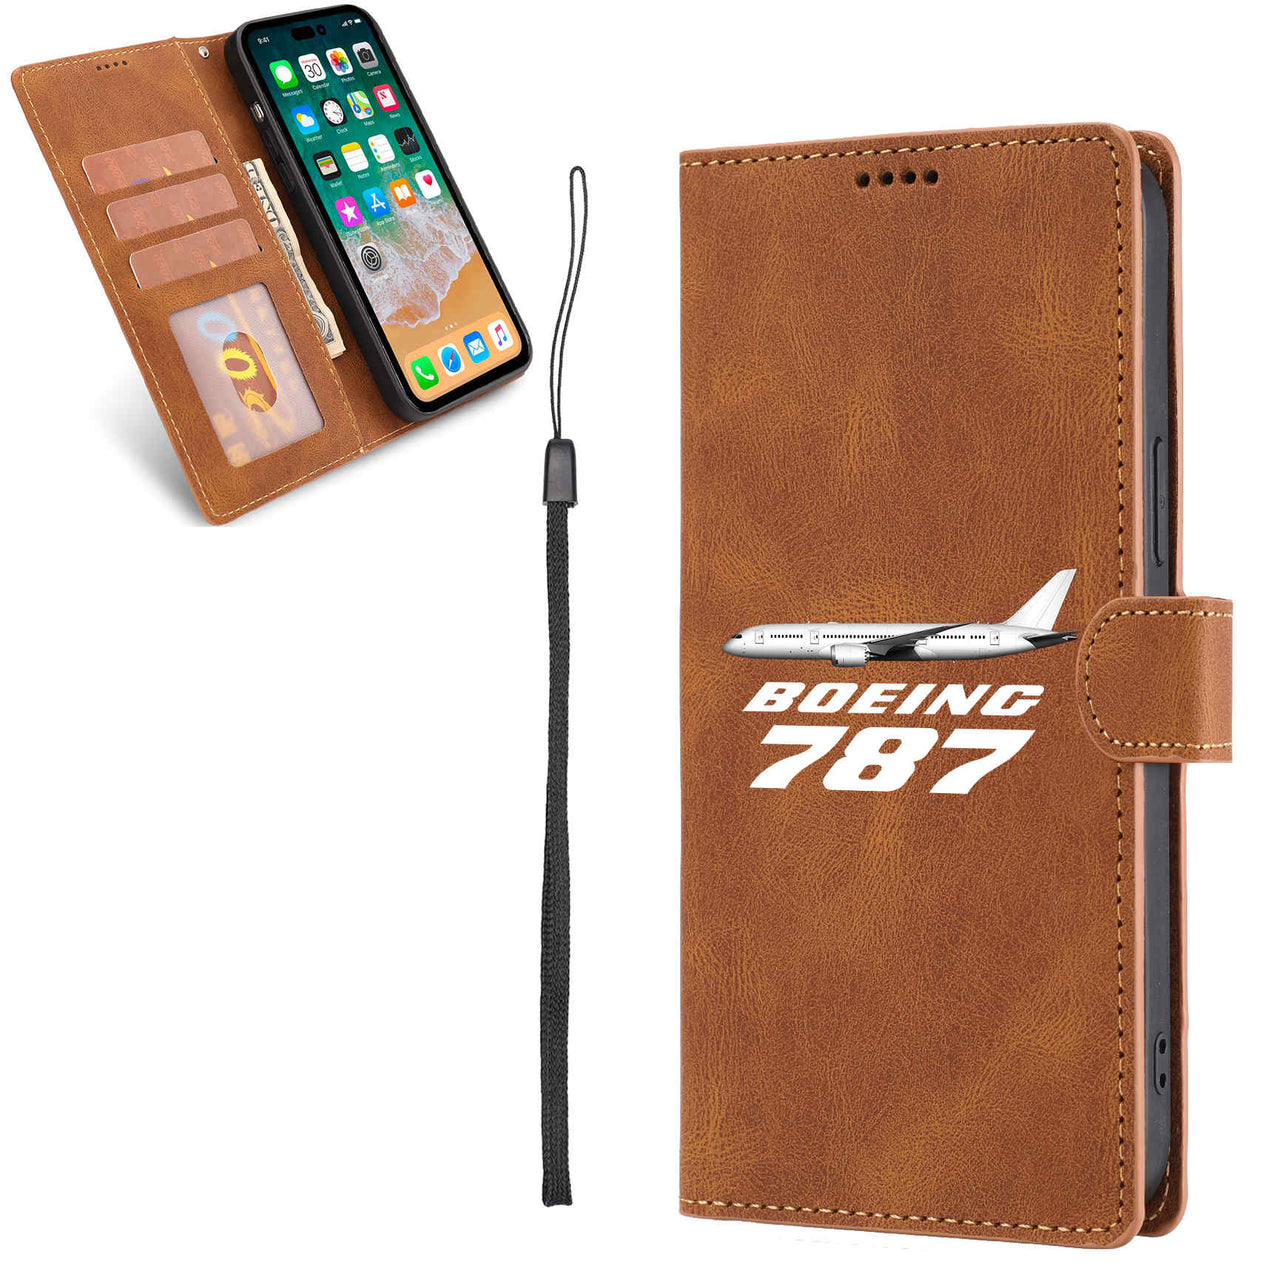 The Boeing 787 Designed Leather Samsung S & Note Cases